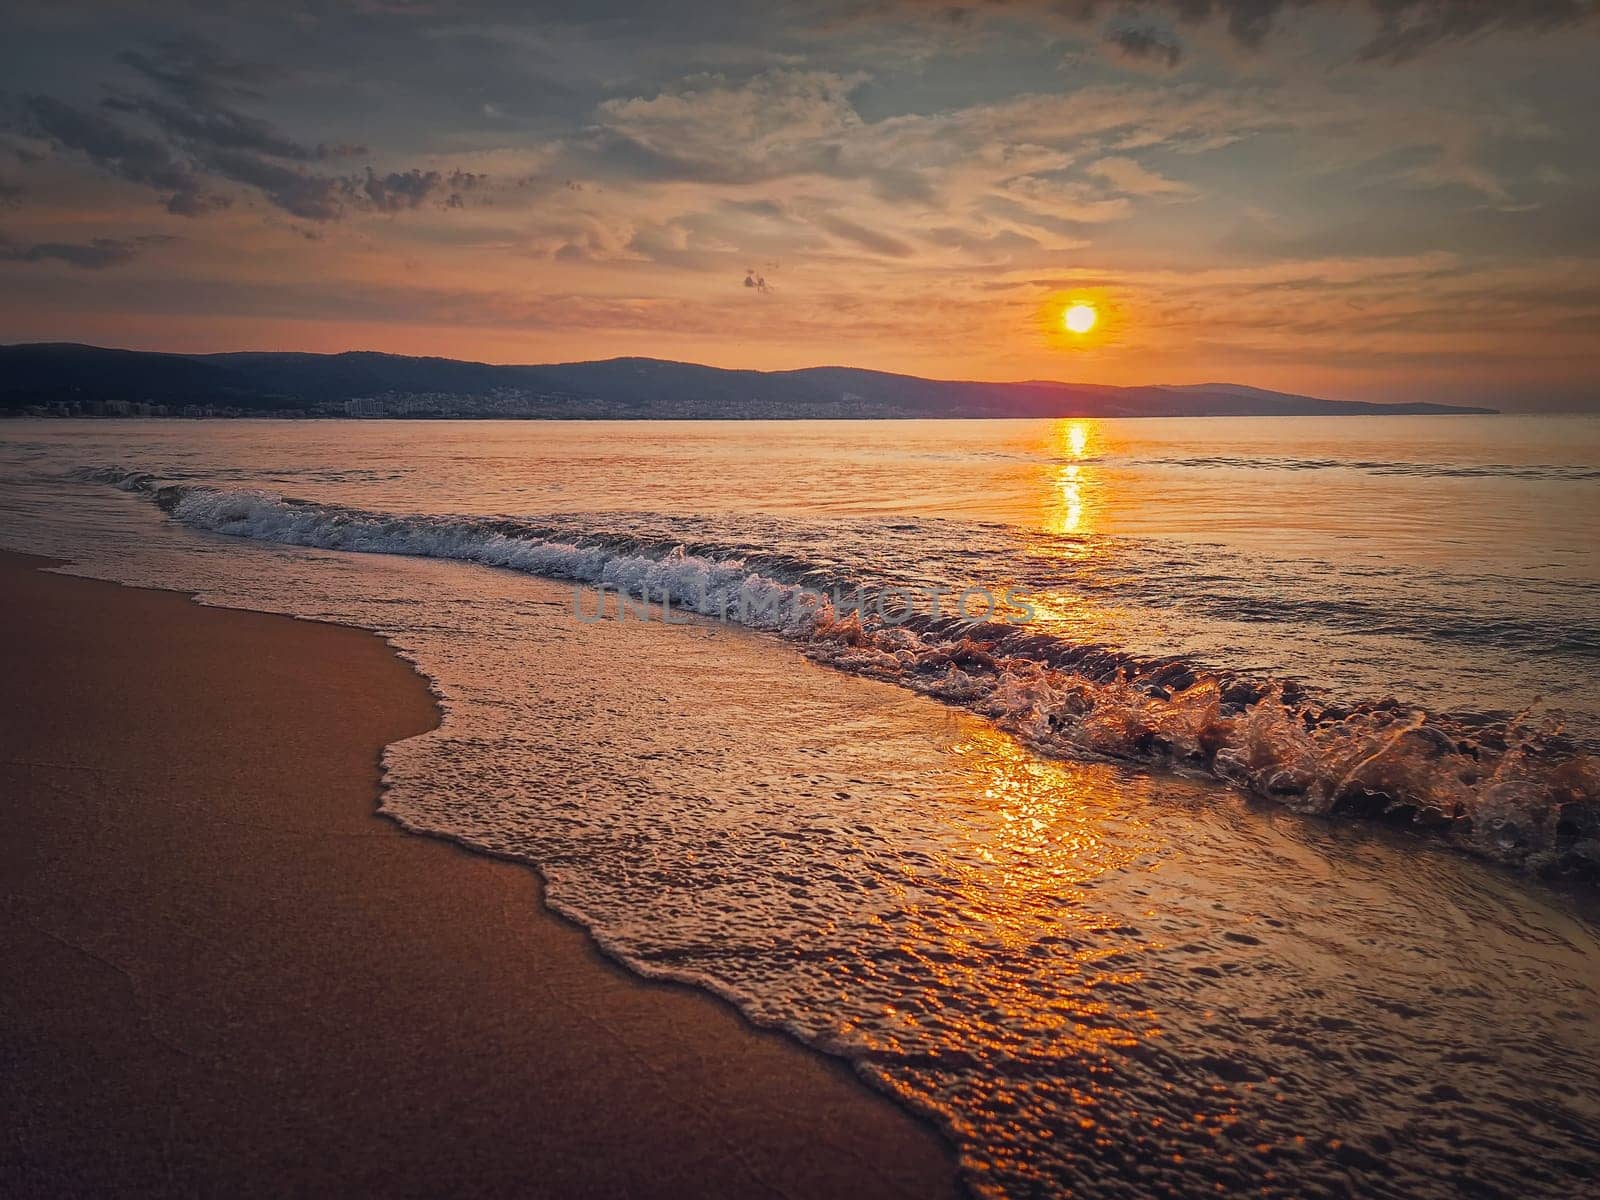 Peaceful seascape, silent morning seaside with beautiful sunrise above the hills and foamy waves hitting the sand. Dawn at the sea, travel background